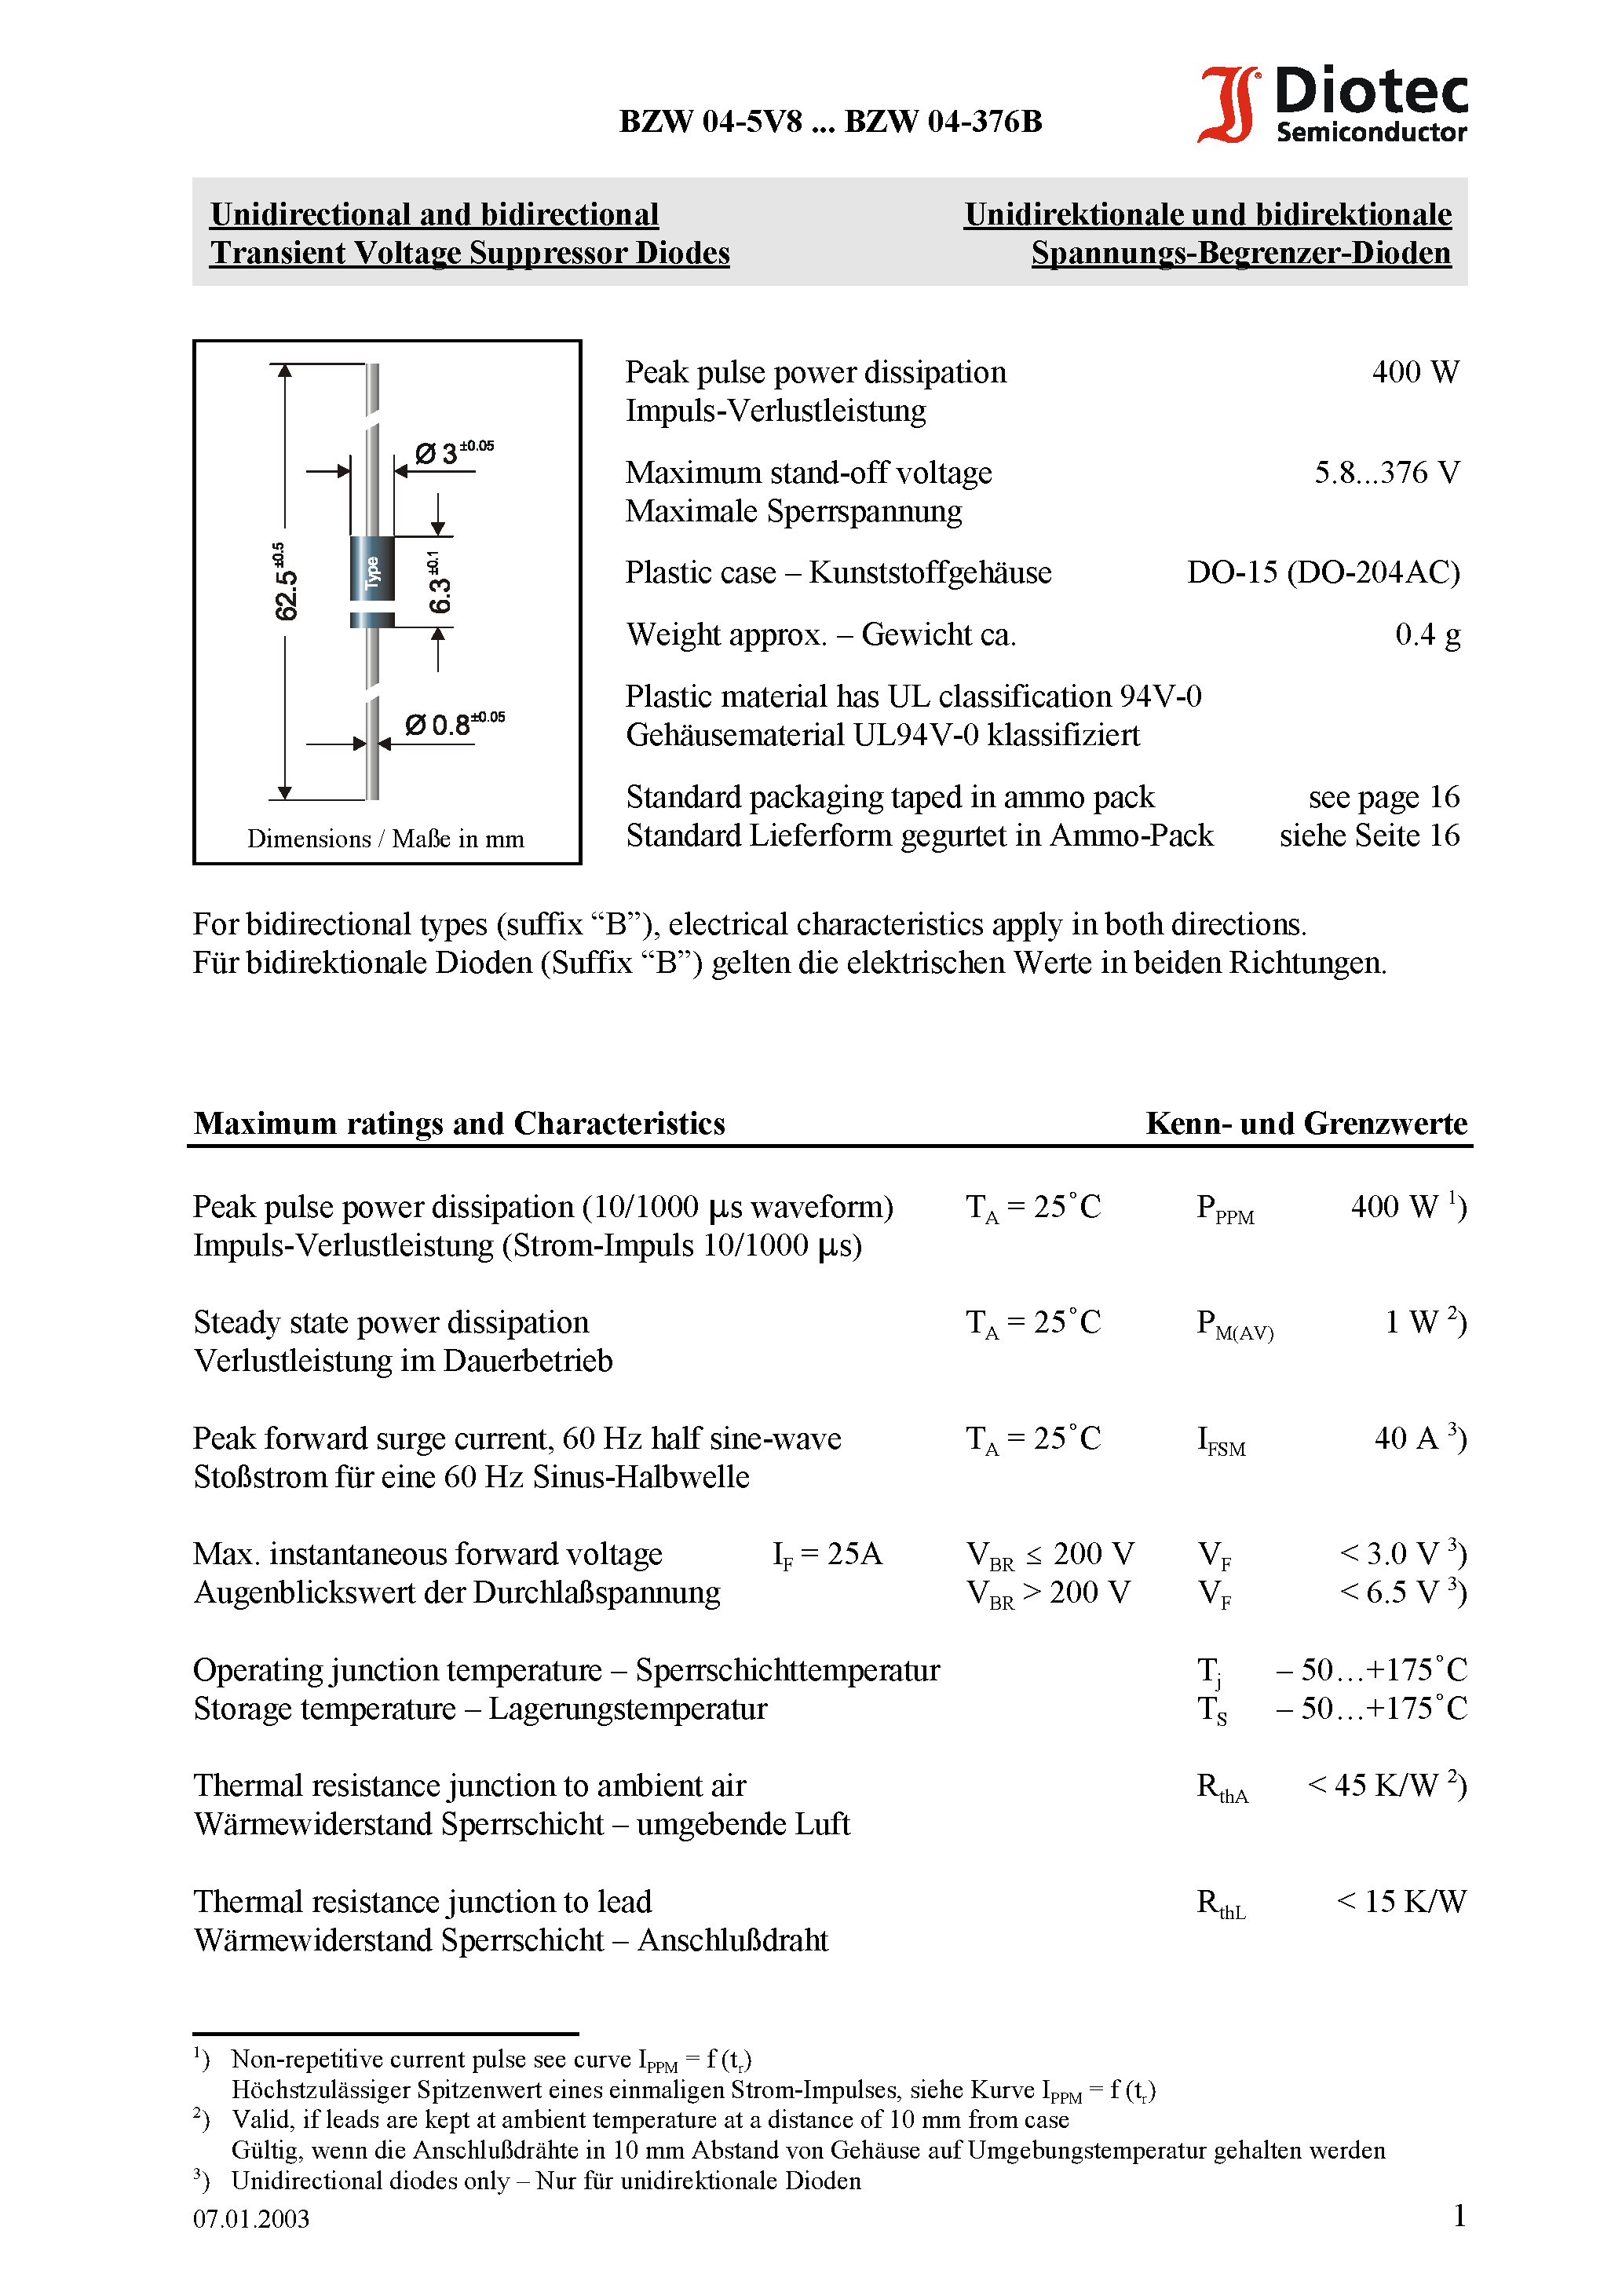 Datasheet BZW04-128 - Unidirectional and bidirectional Transient Voltage Suppressor Diodes page 1